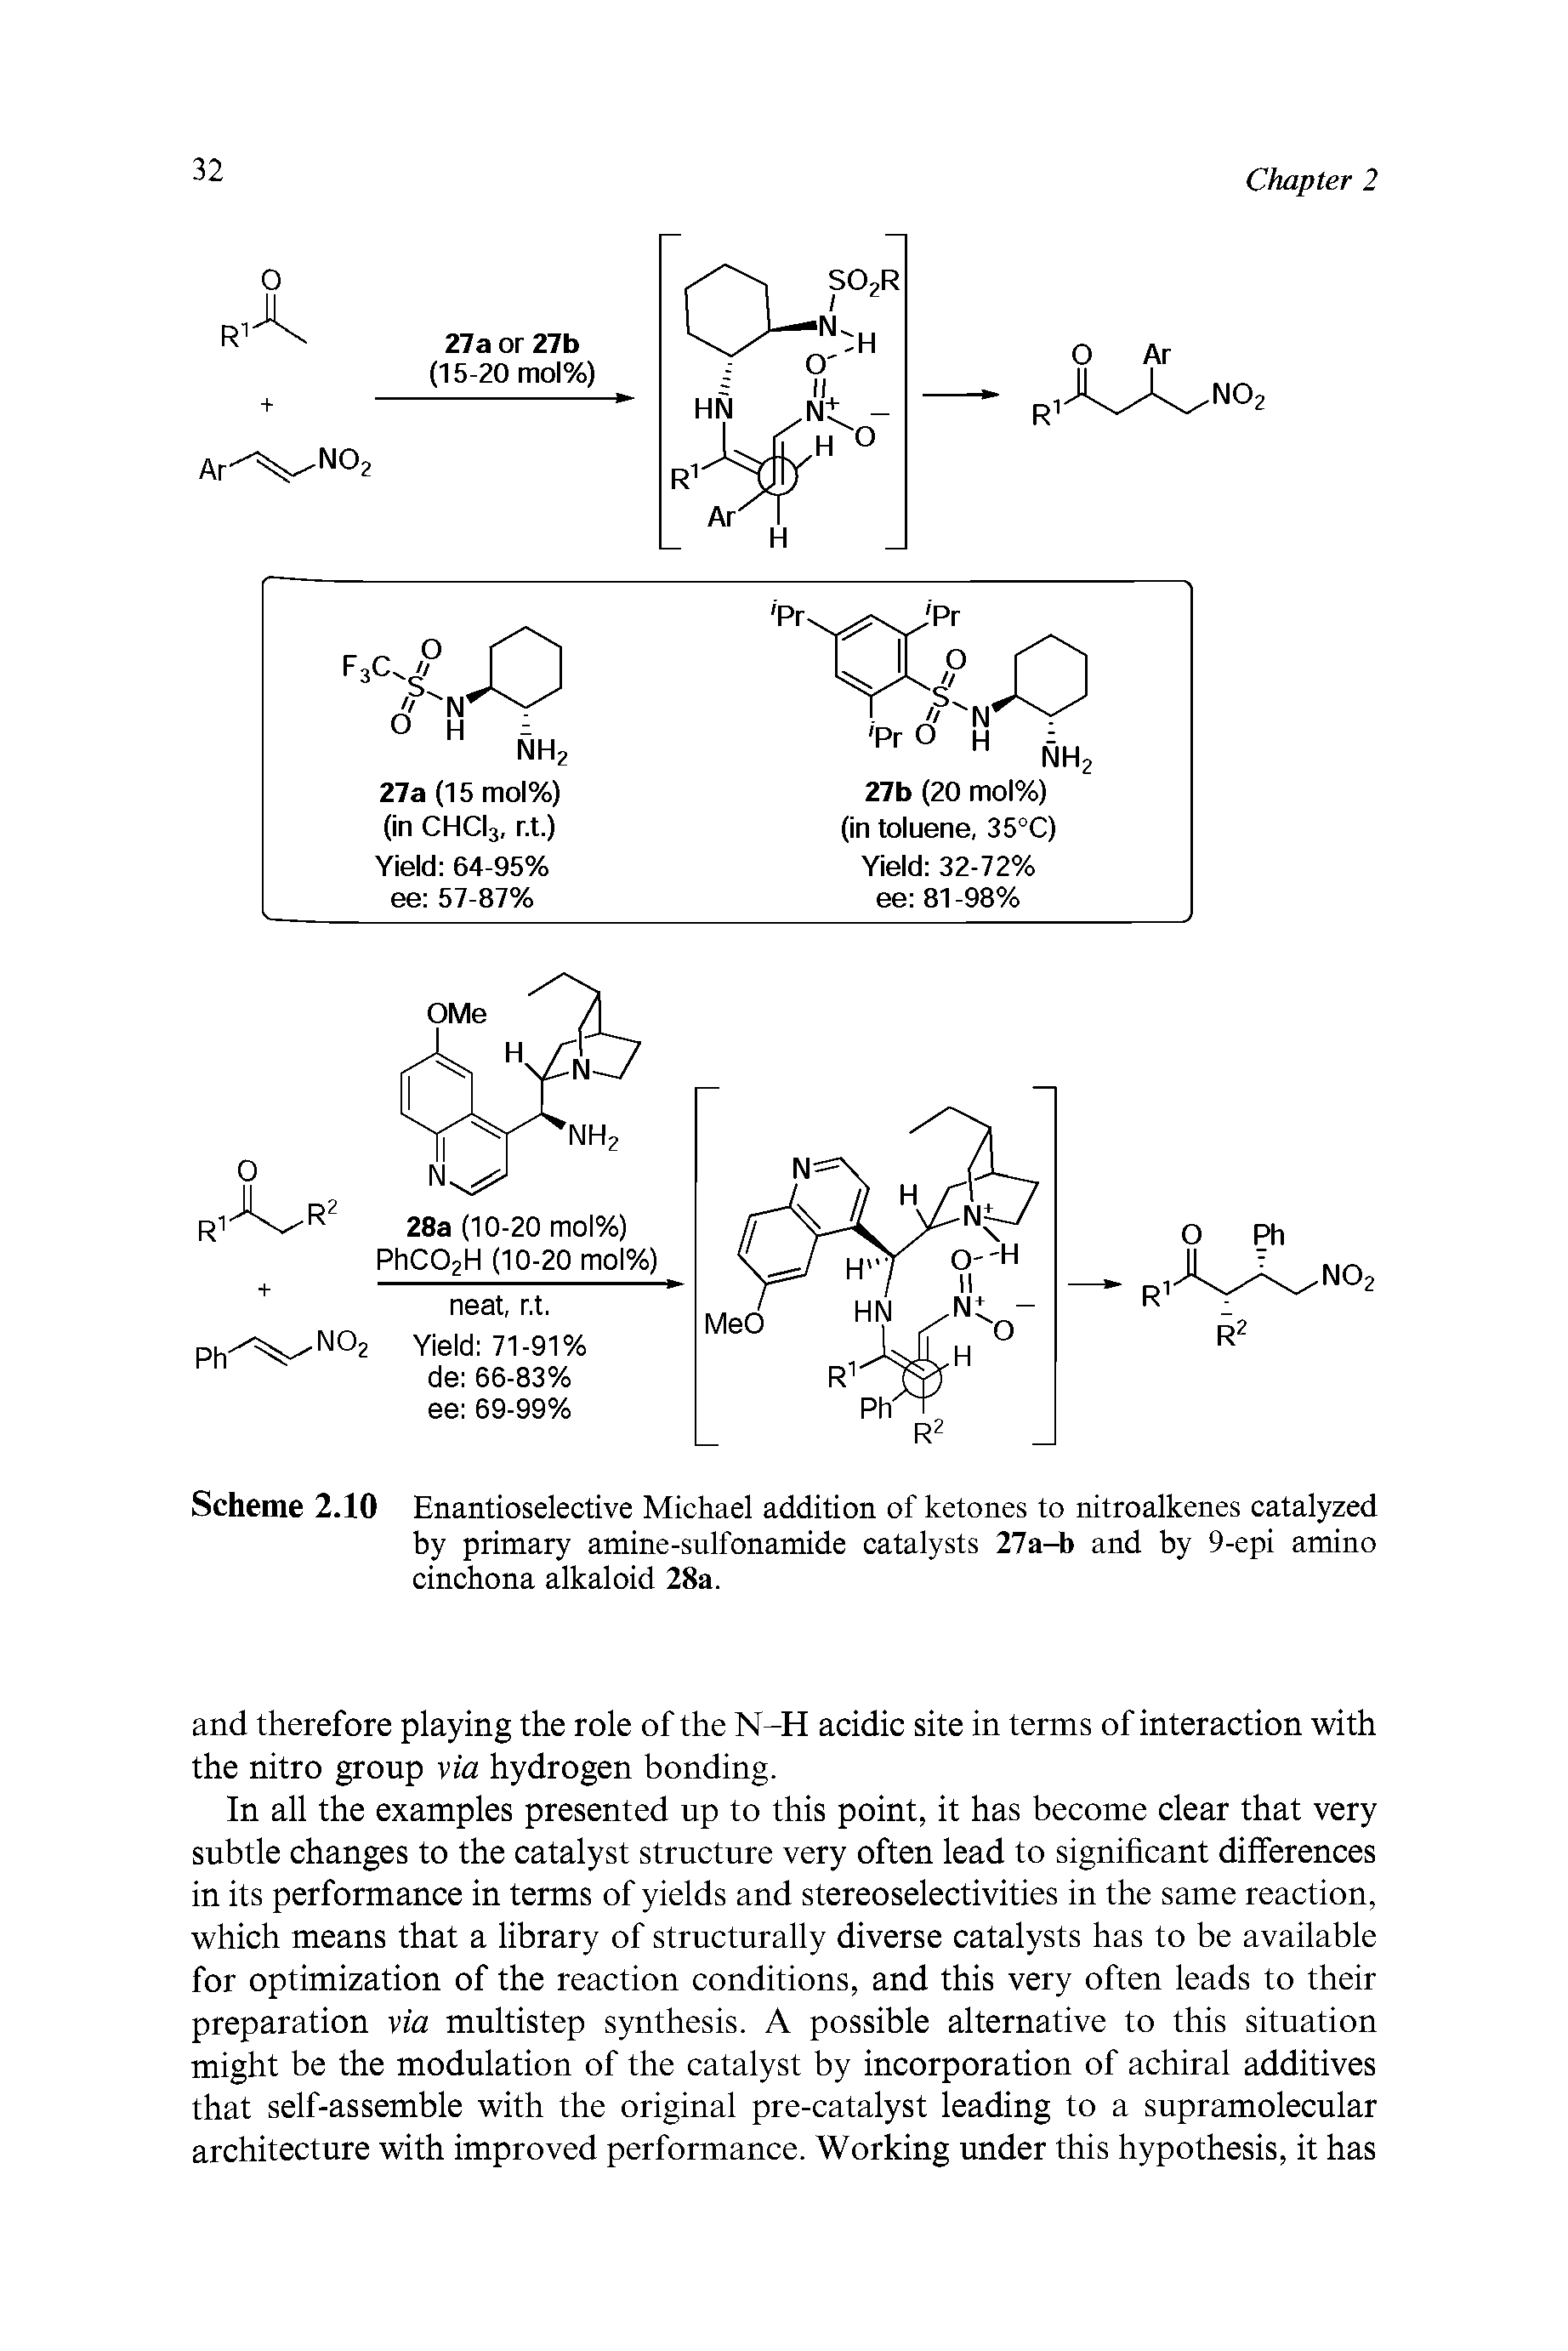 Scheme 2.10 Enantioselective Michael addition of ketones to nitroalkenes catalyzed by primary amine-sulfonamide catalysts 27a-b and by 9-epi amino cinchona alkaloid 28a.